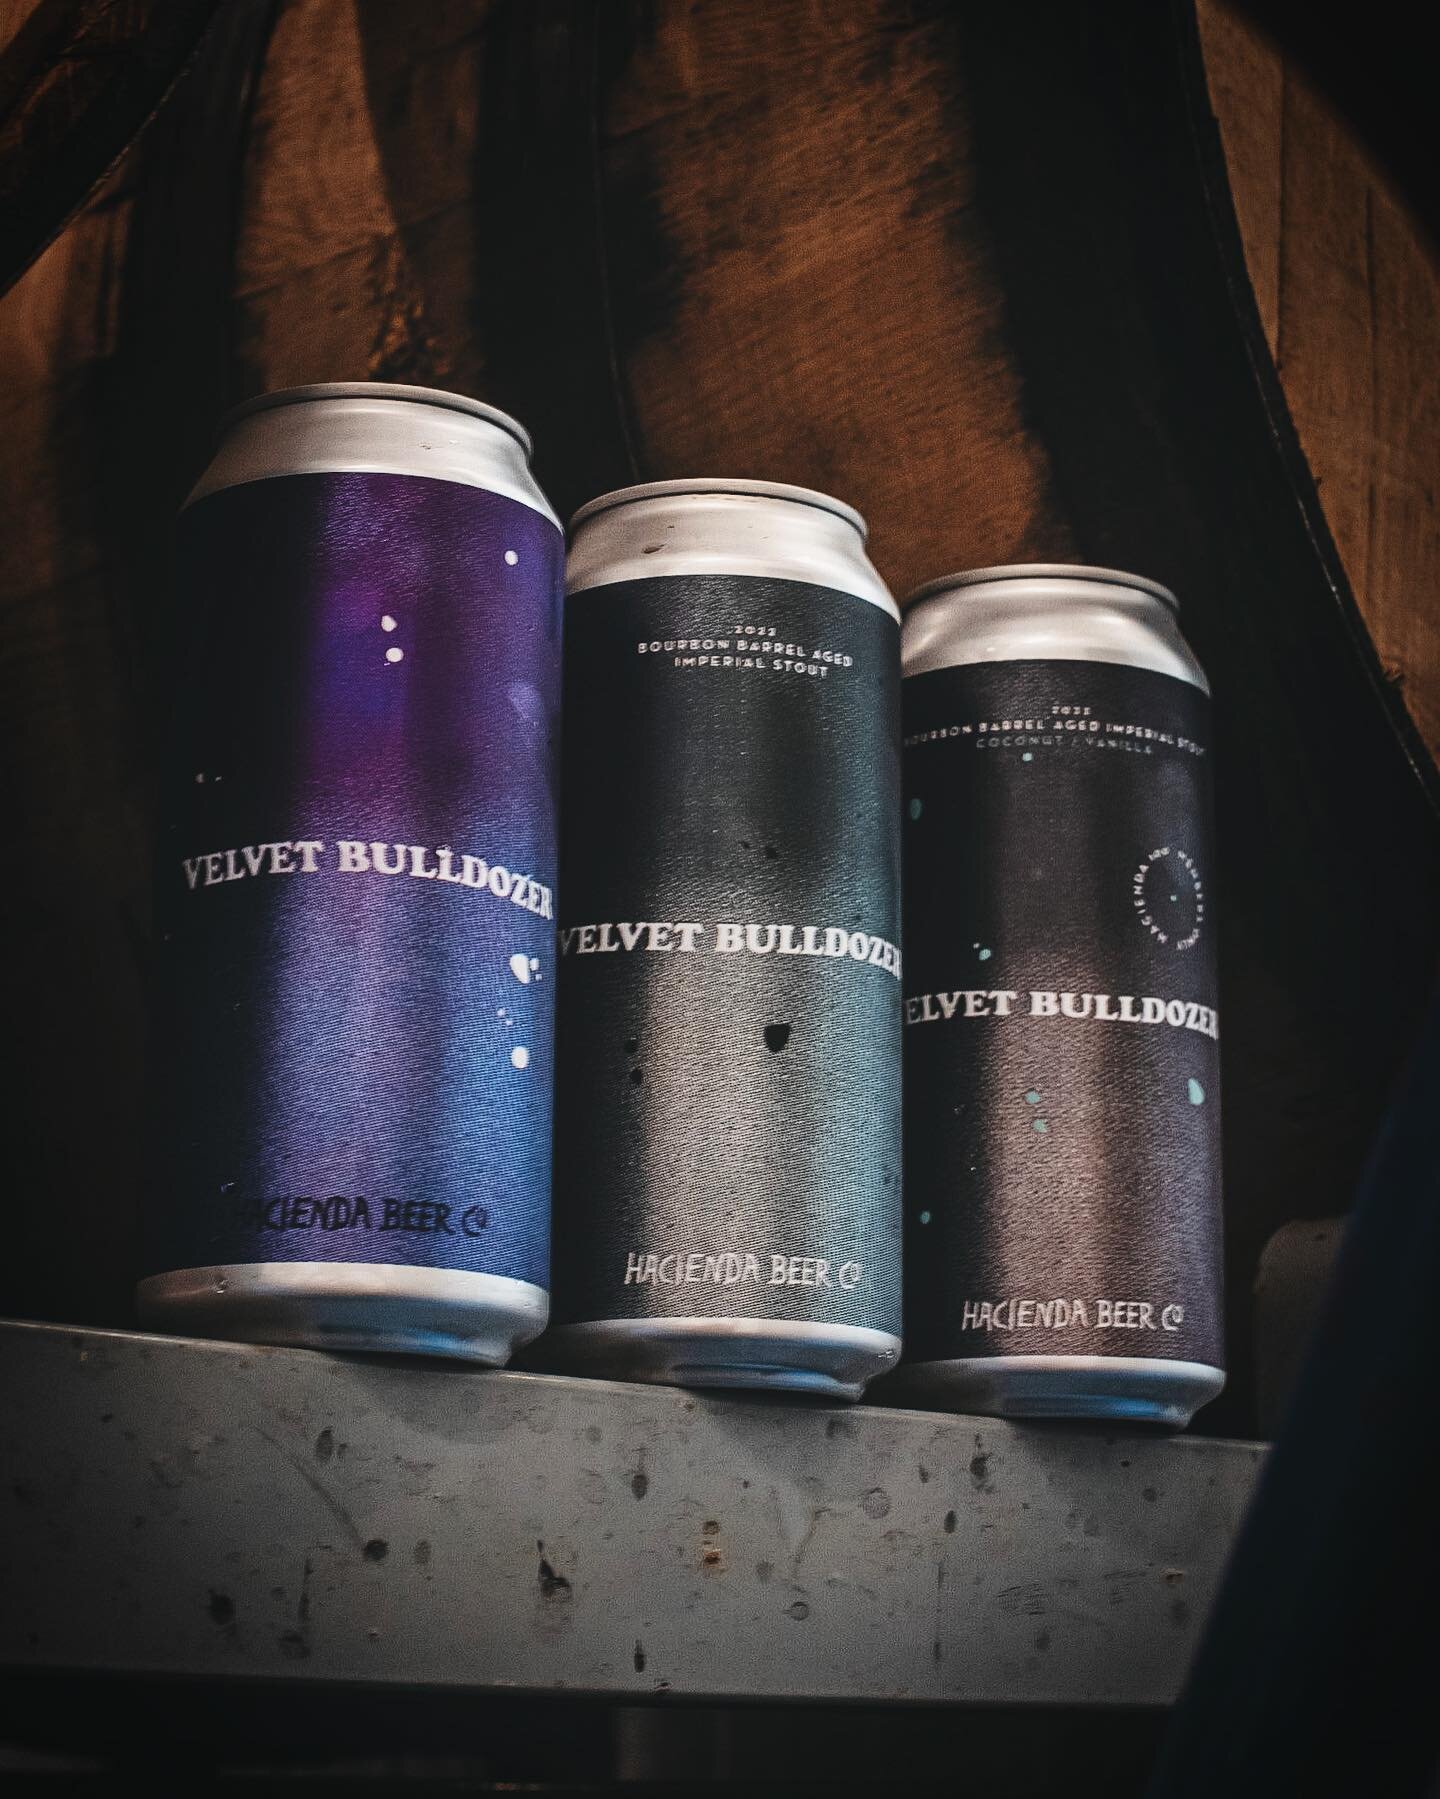 A TRIFECTA OF VELVET BULLDOZER ARRIVES FRIDAY. 😈😈😈

Pre-order today to ensure you get snag some of these cans. 

Velvet Bulldozer 2022 is our yearly, massive imperial stout&mdash;this year's beer is conditioned on a ton of cacao nibs, Madagascar &